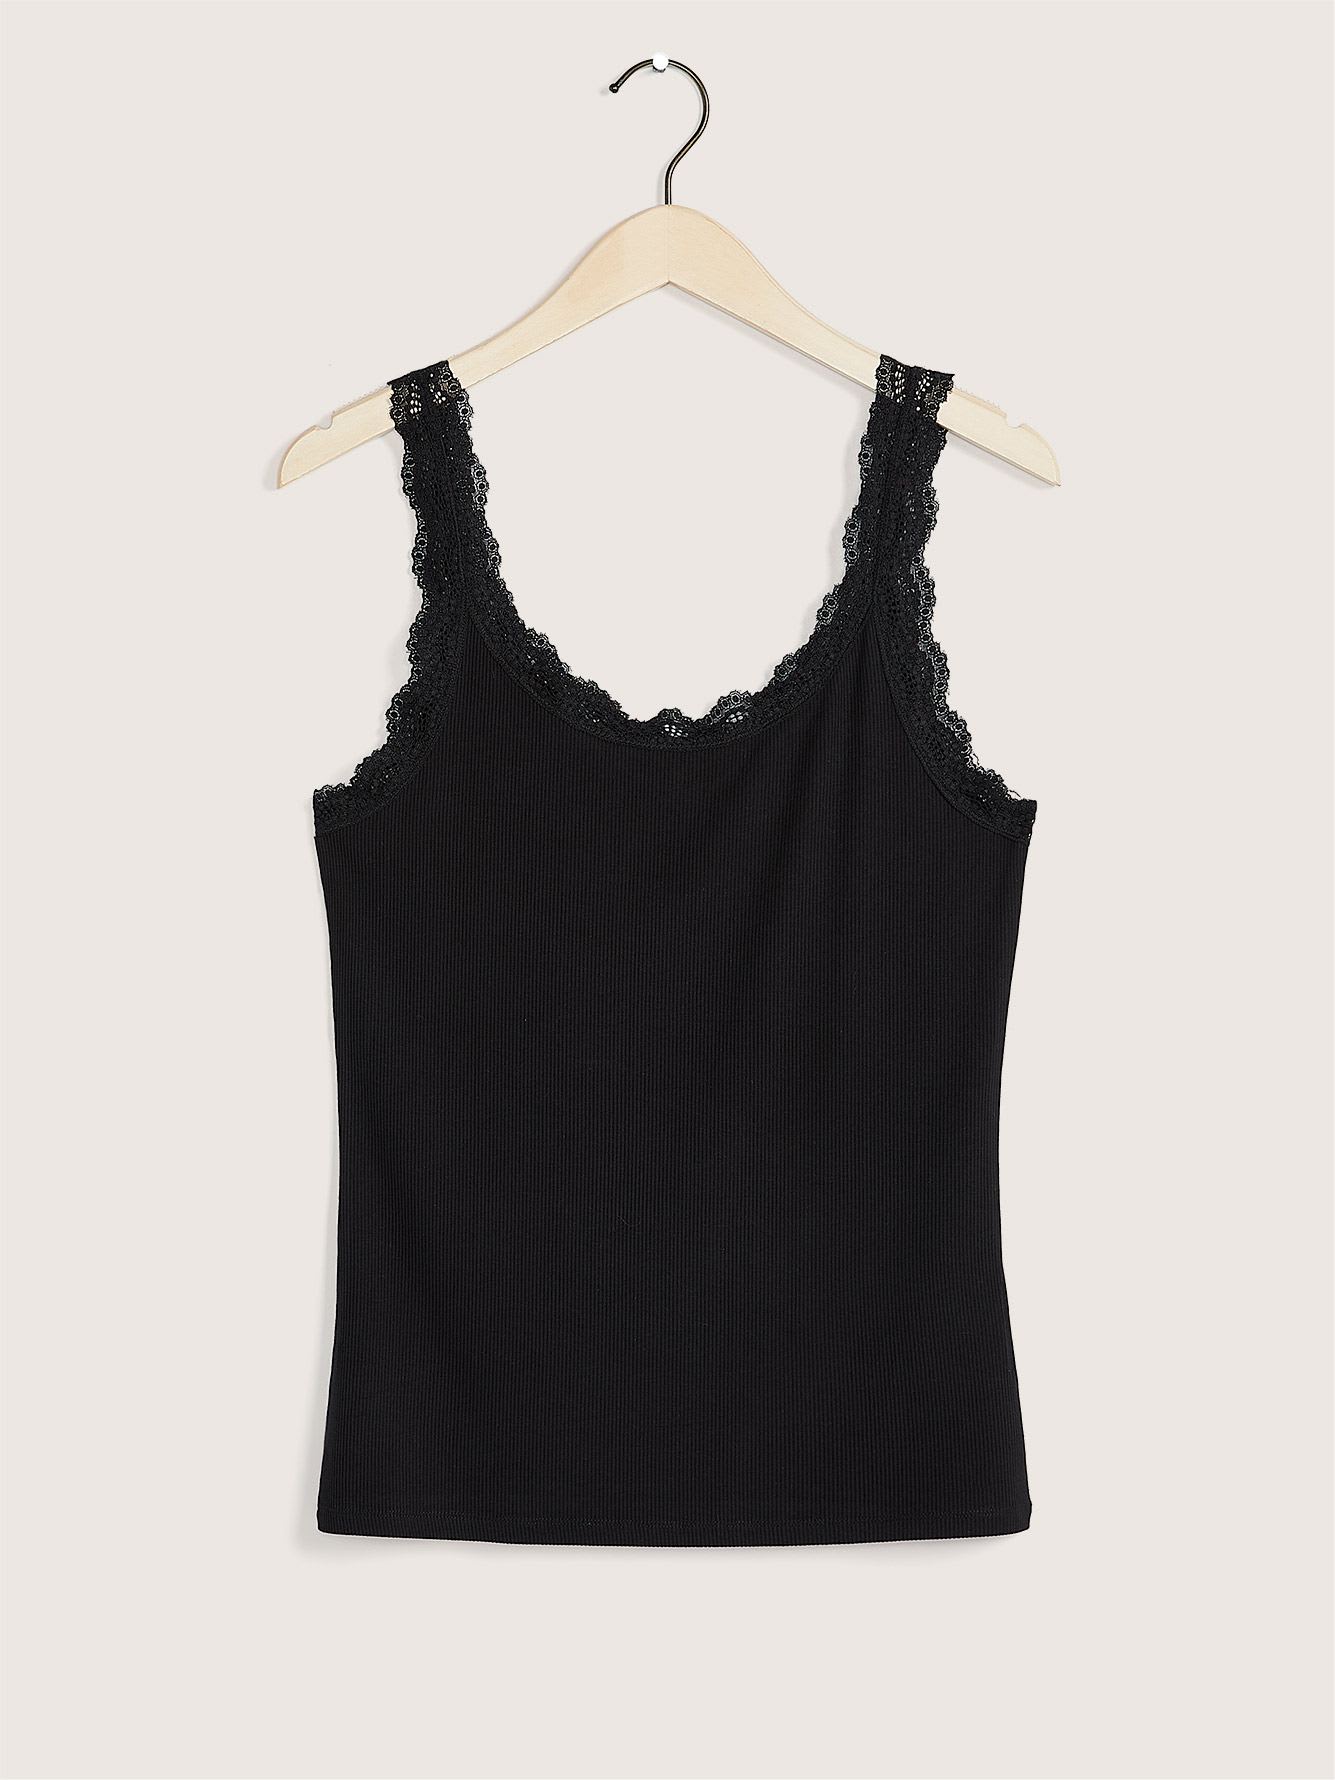 Reversible Cami with Lace Details - Addition Elle | Penningtons